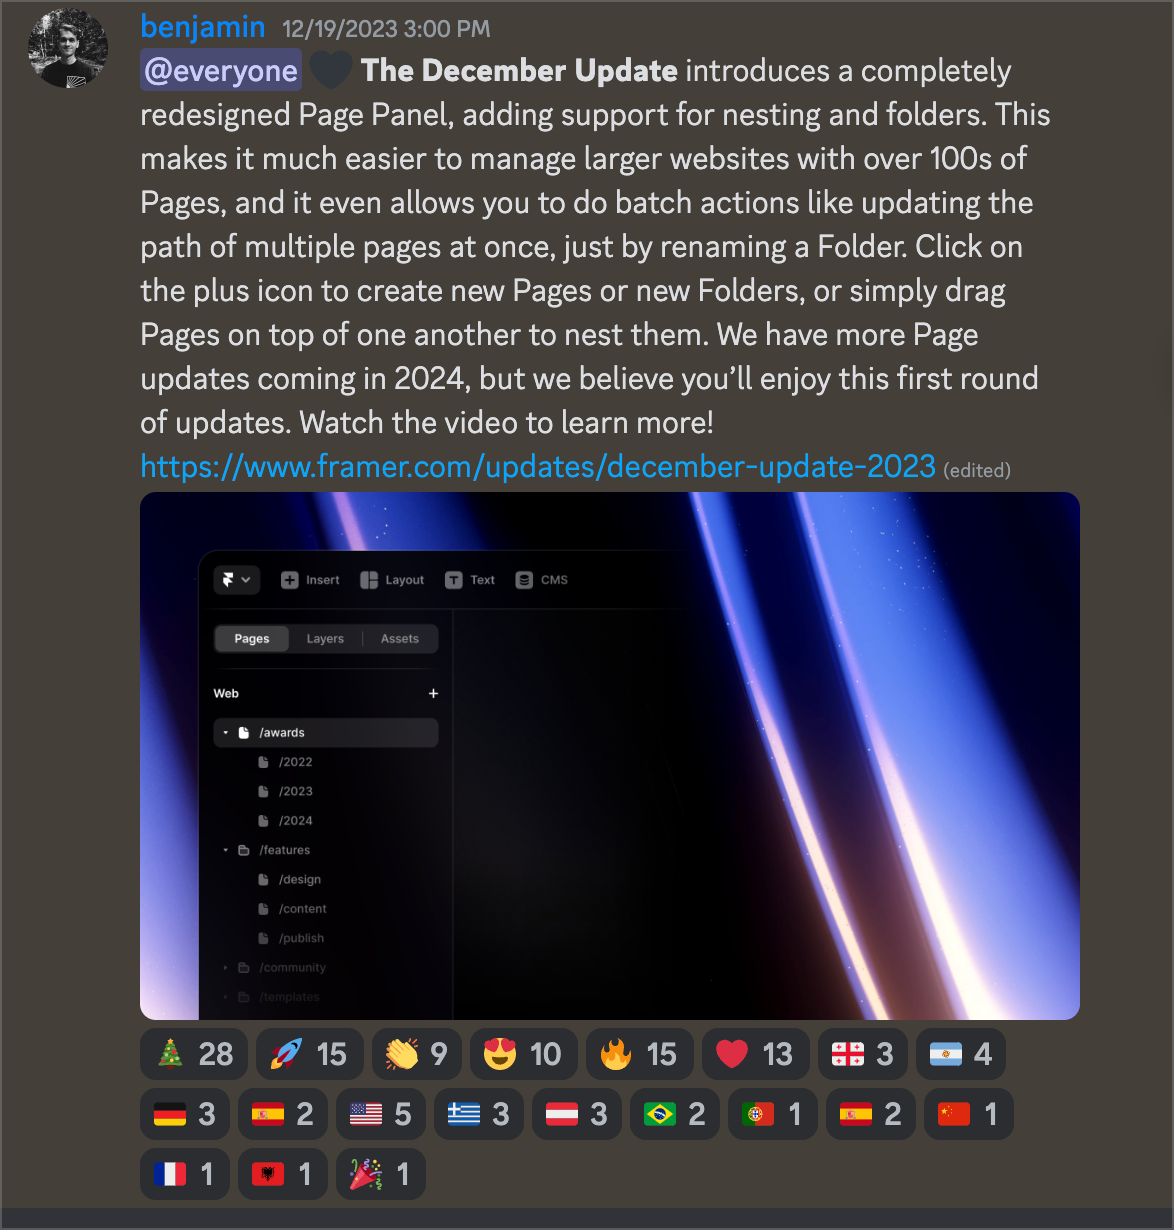 Framer keeps the feature updates visible through their highly active Discord community (Big fan of Benjamin’s community strategy BTW)